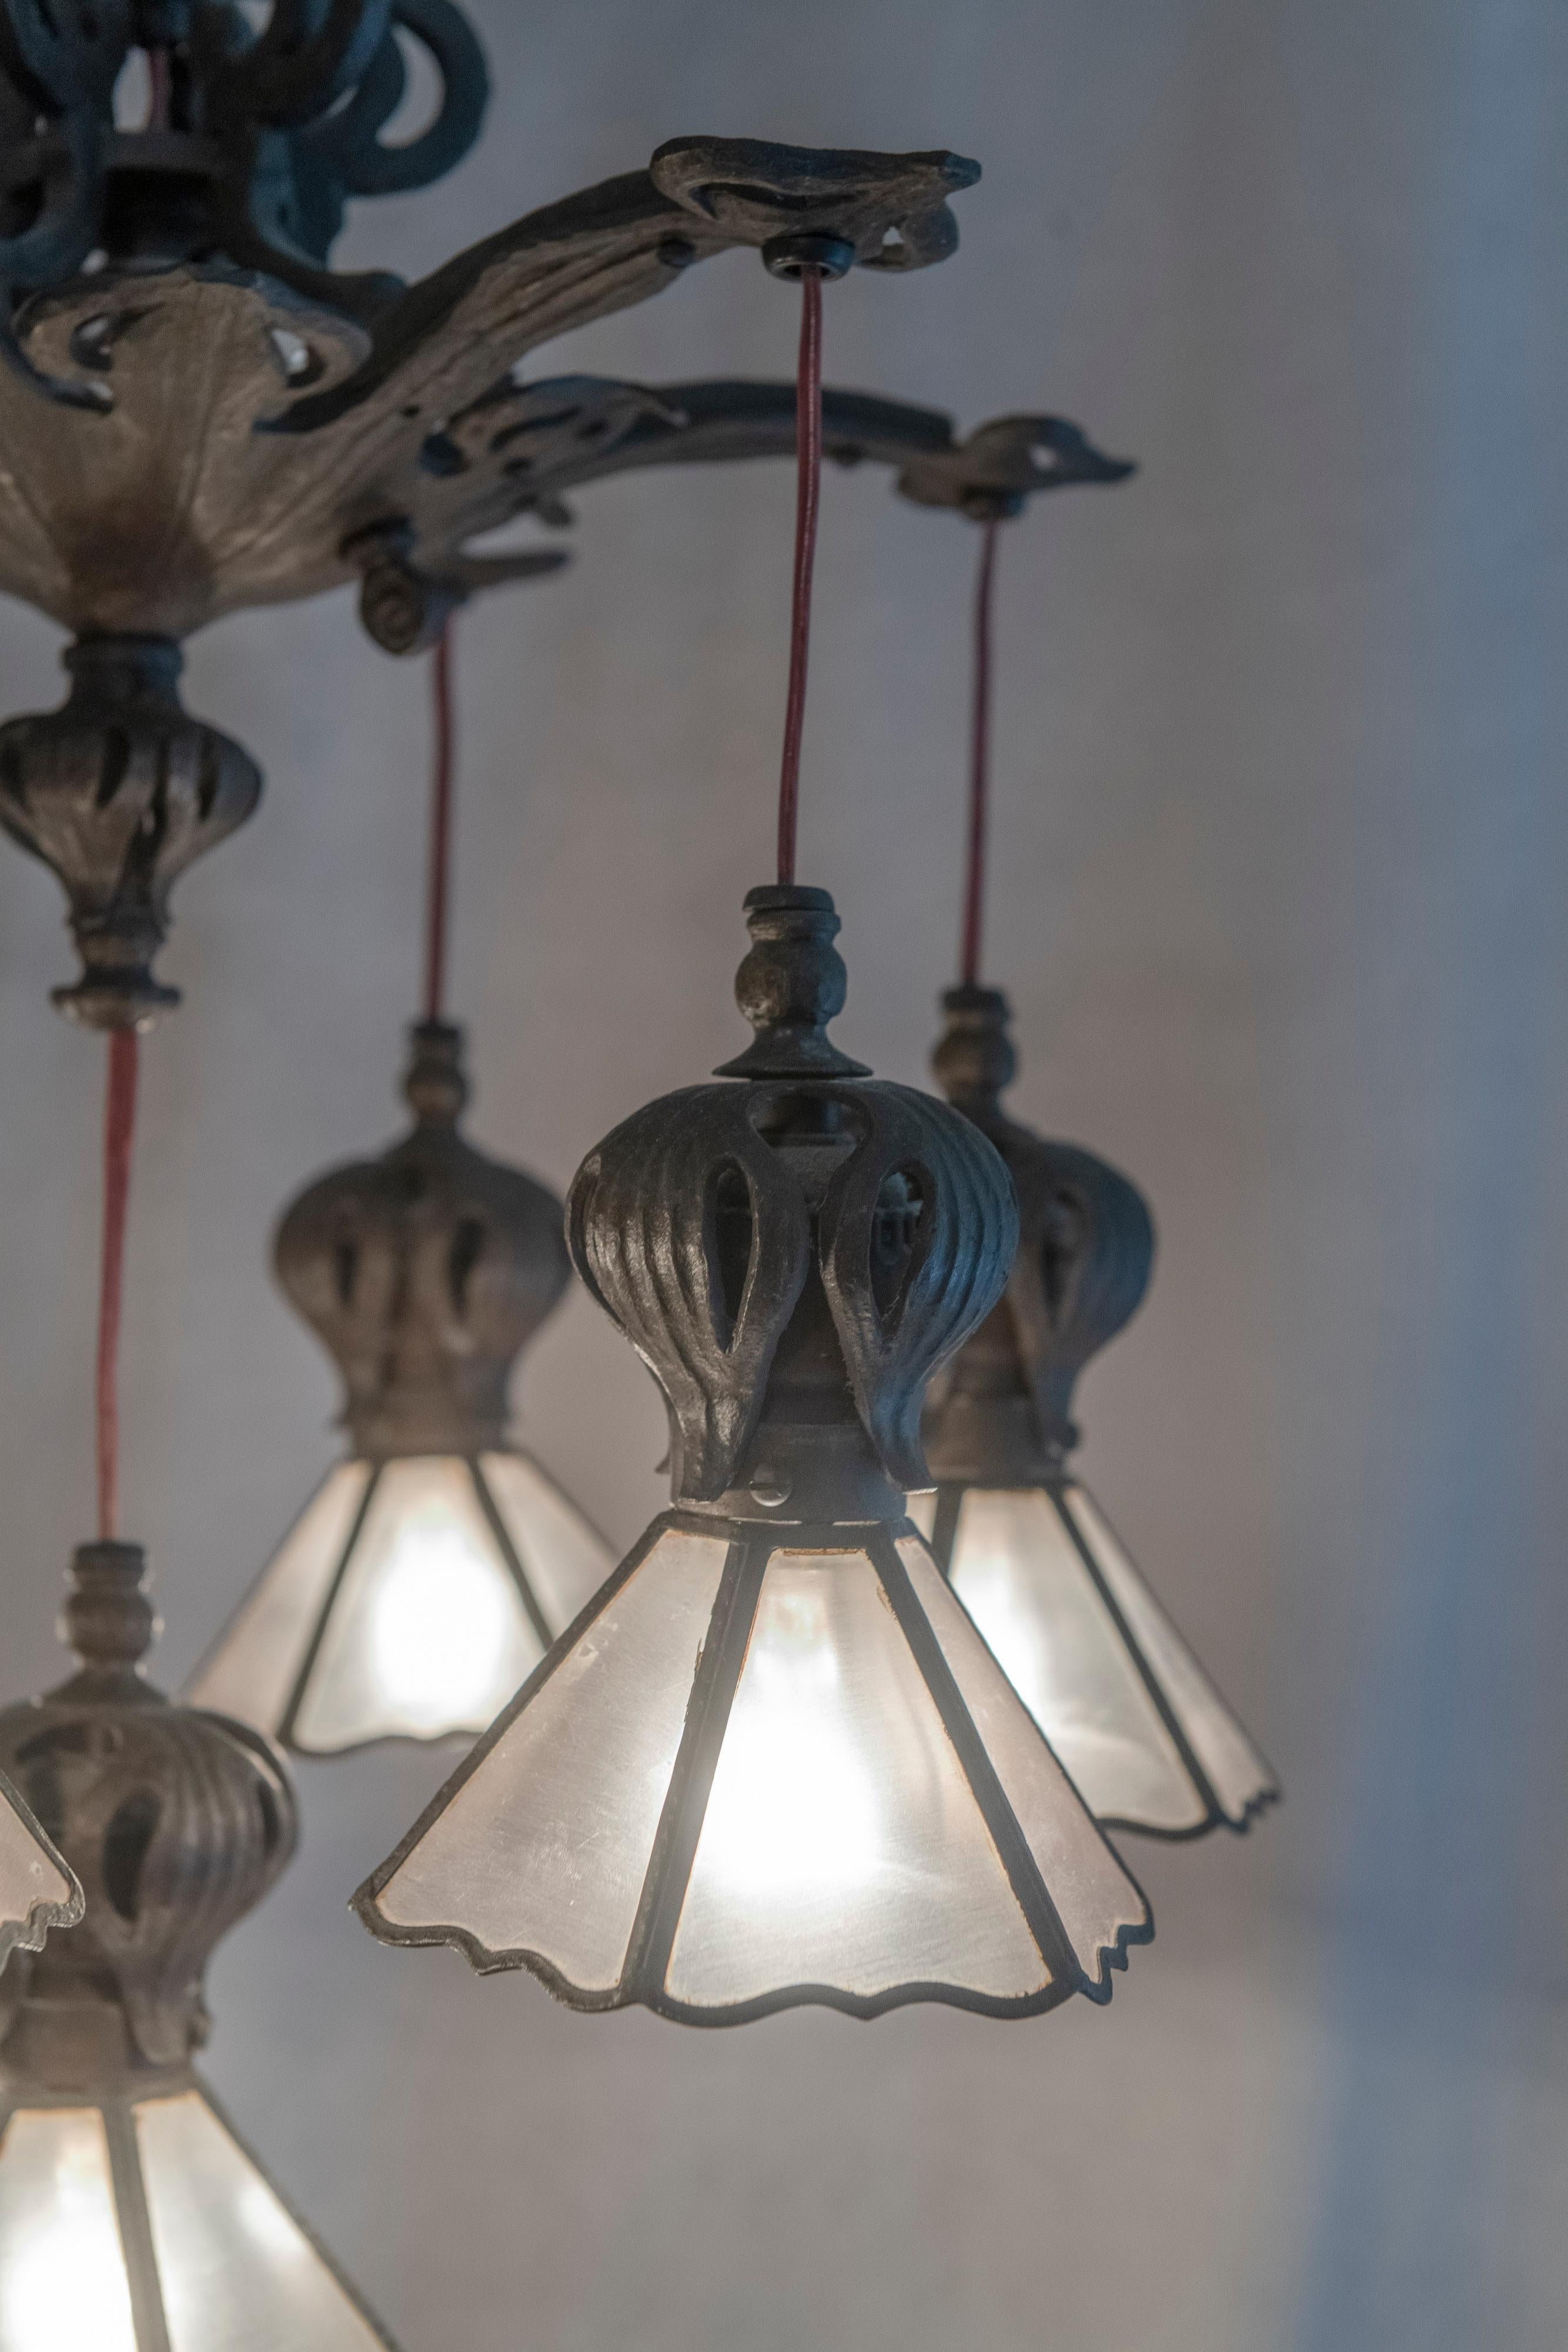 This exceptional 7 light chandelier is one great light. It has much to offer. For starters it is American, and you don't see much commitment to art nouveau lighting of this quality that isn't Austrian or French. If you look at the measurements it is